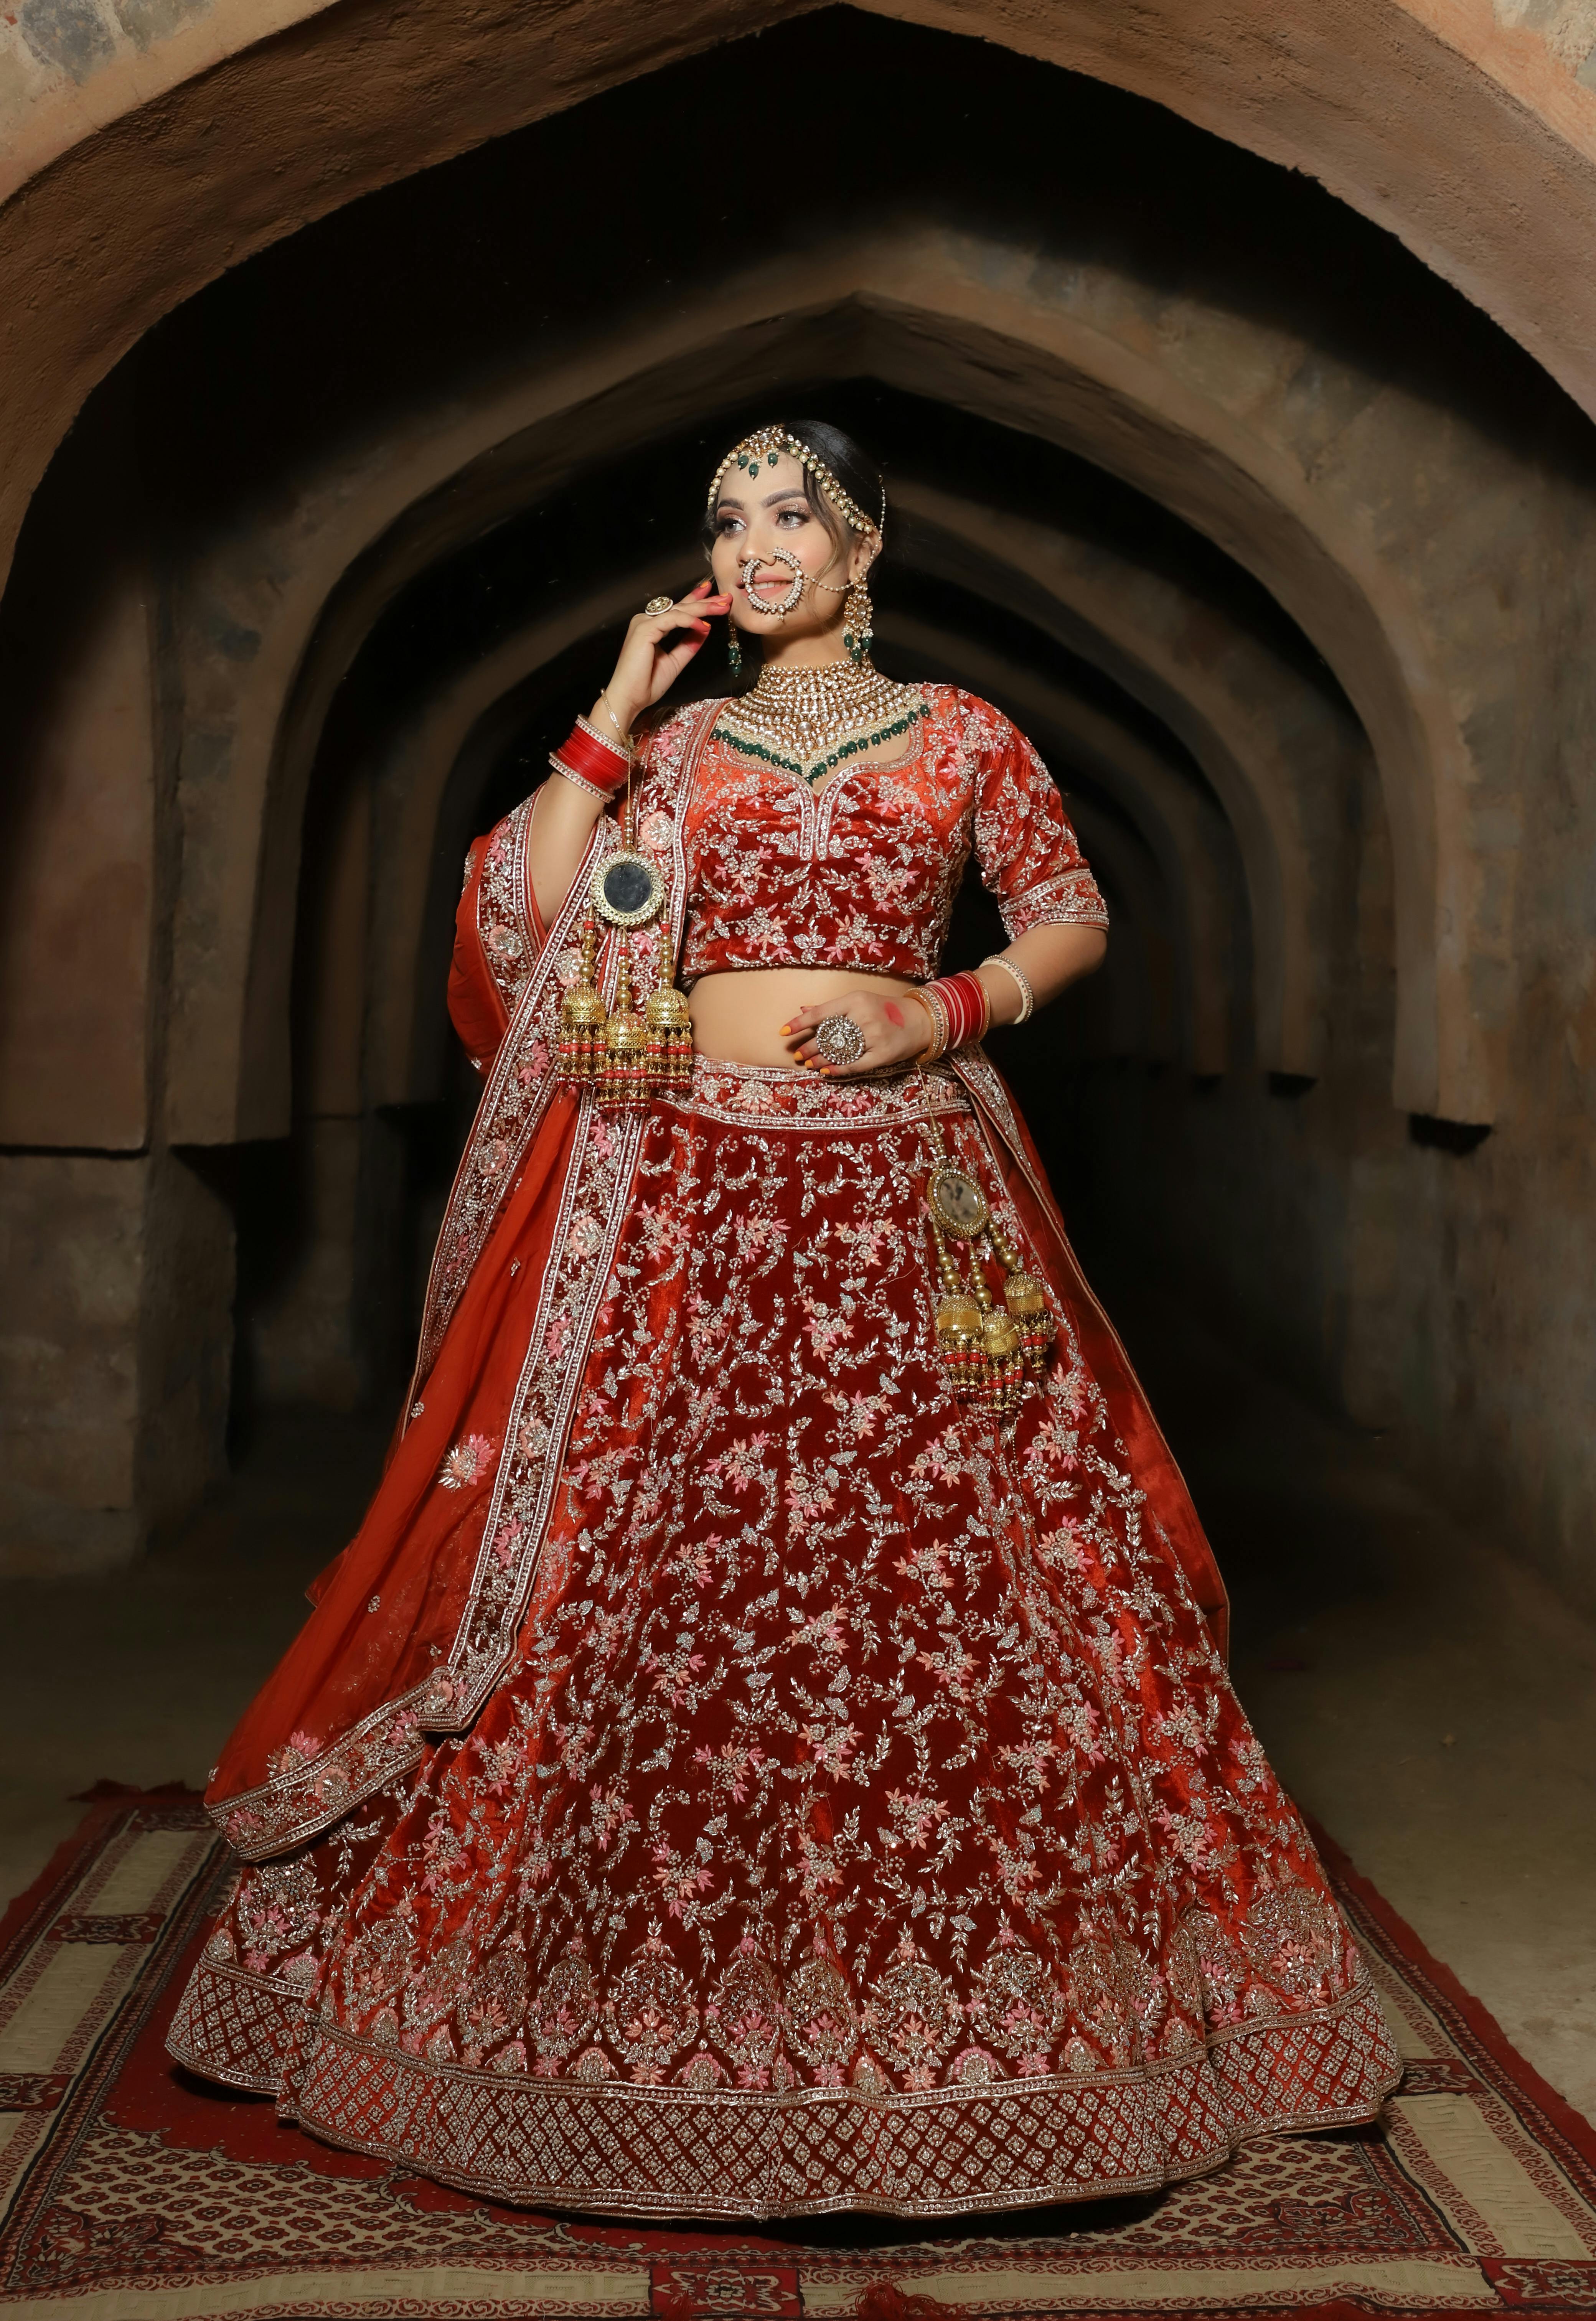 10+ Photos Of Rajasthani Brides That Will Mesmerise You! | Rajasthani bride,  Bridal lehenga red, Rajasthani dress